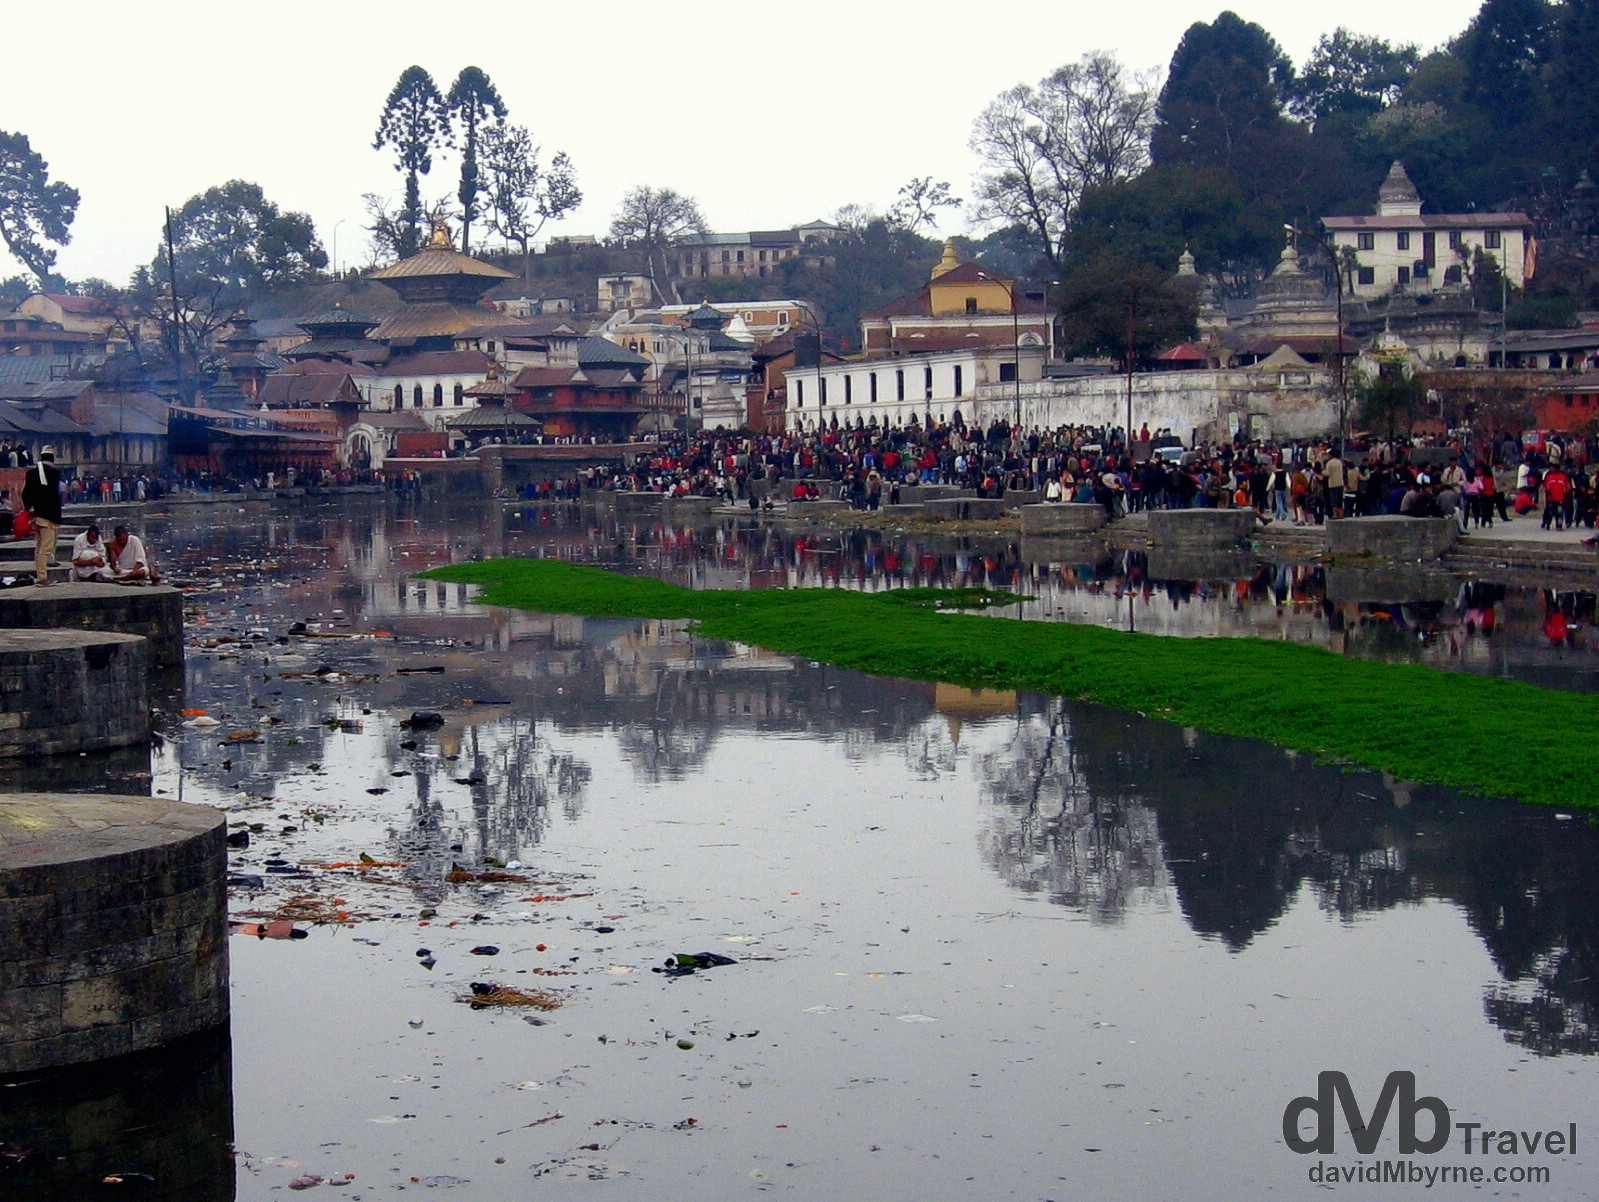 Pashupatinath, the site of the most important Hindi temples in Nepal (gold pagoda in the background), in Kathmandu, Nepal. March 6, 2008.